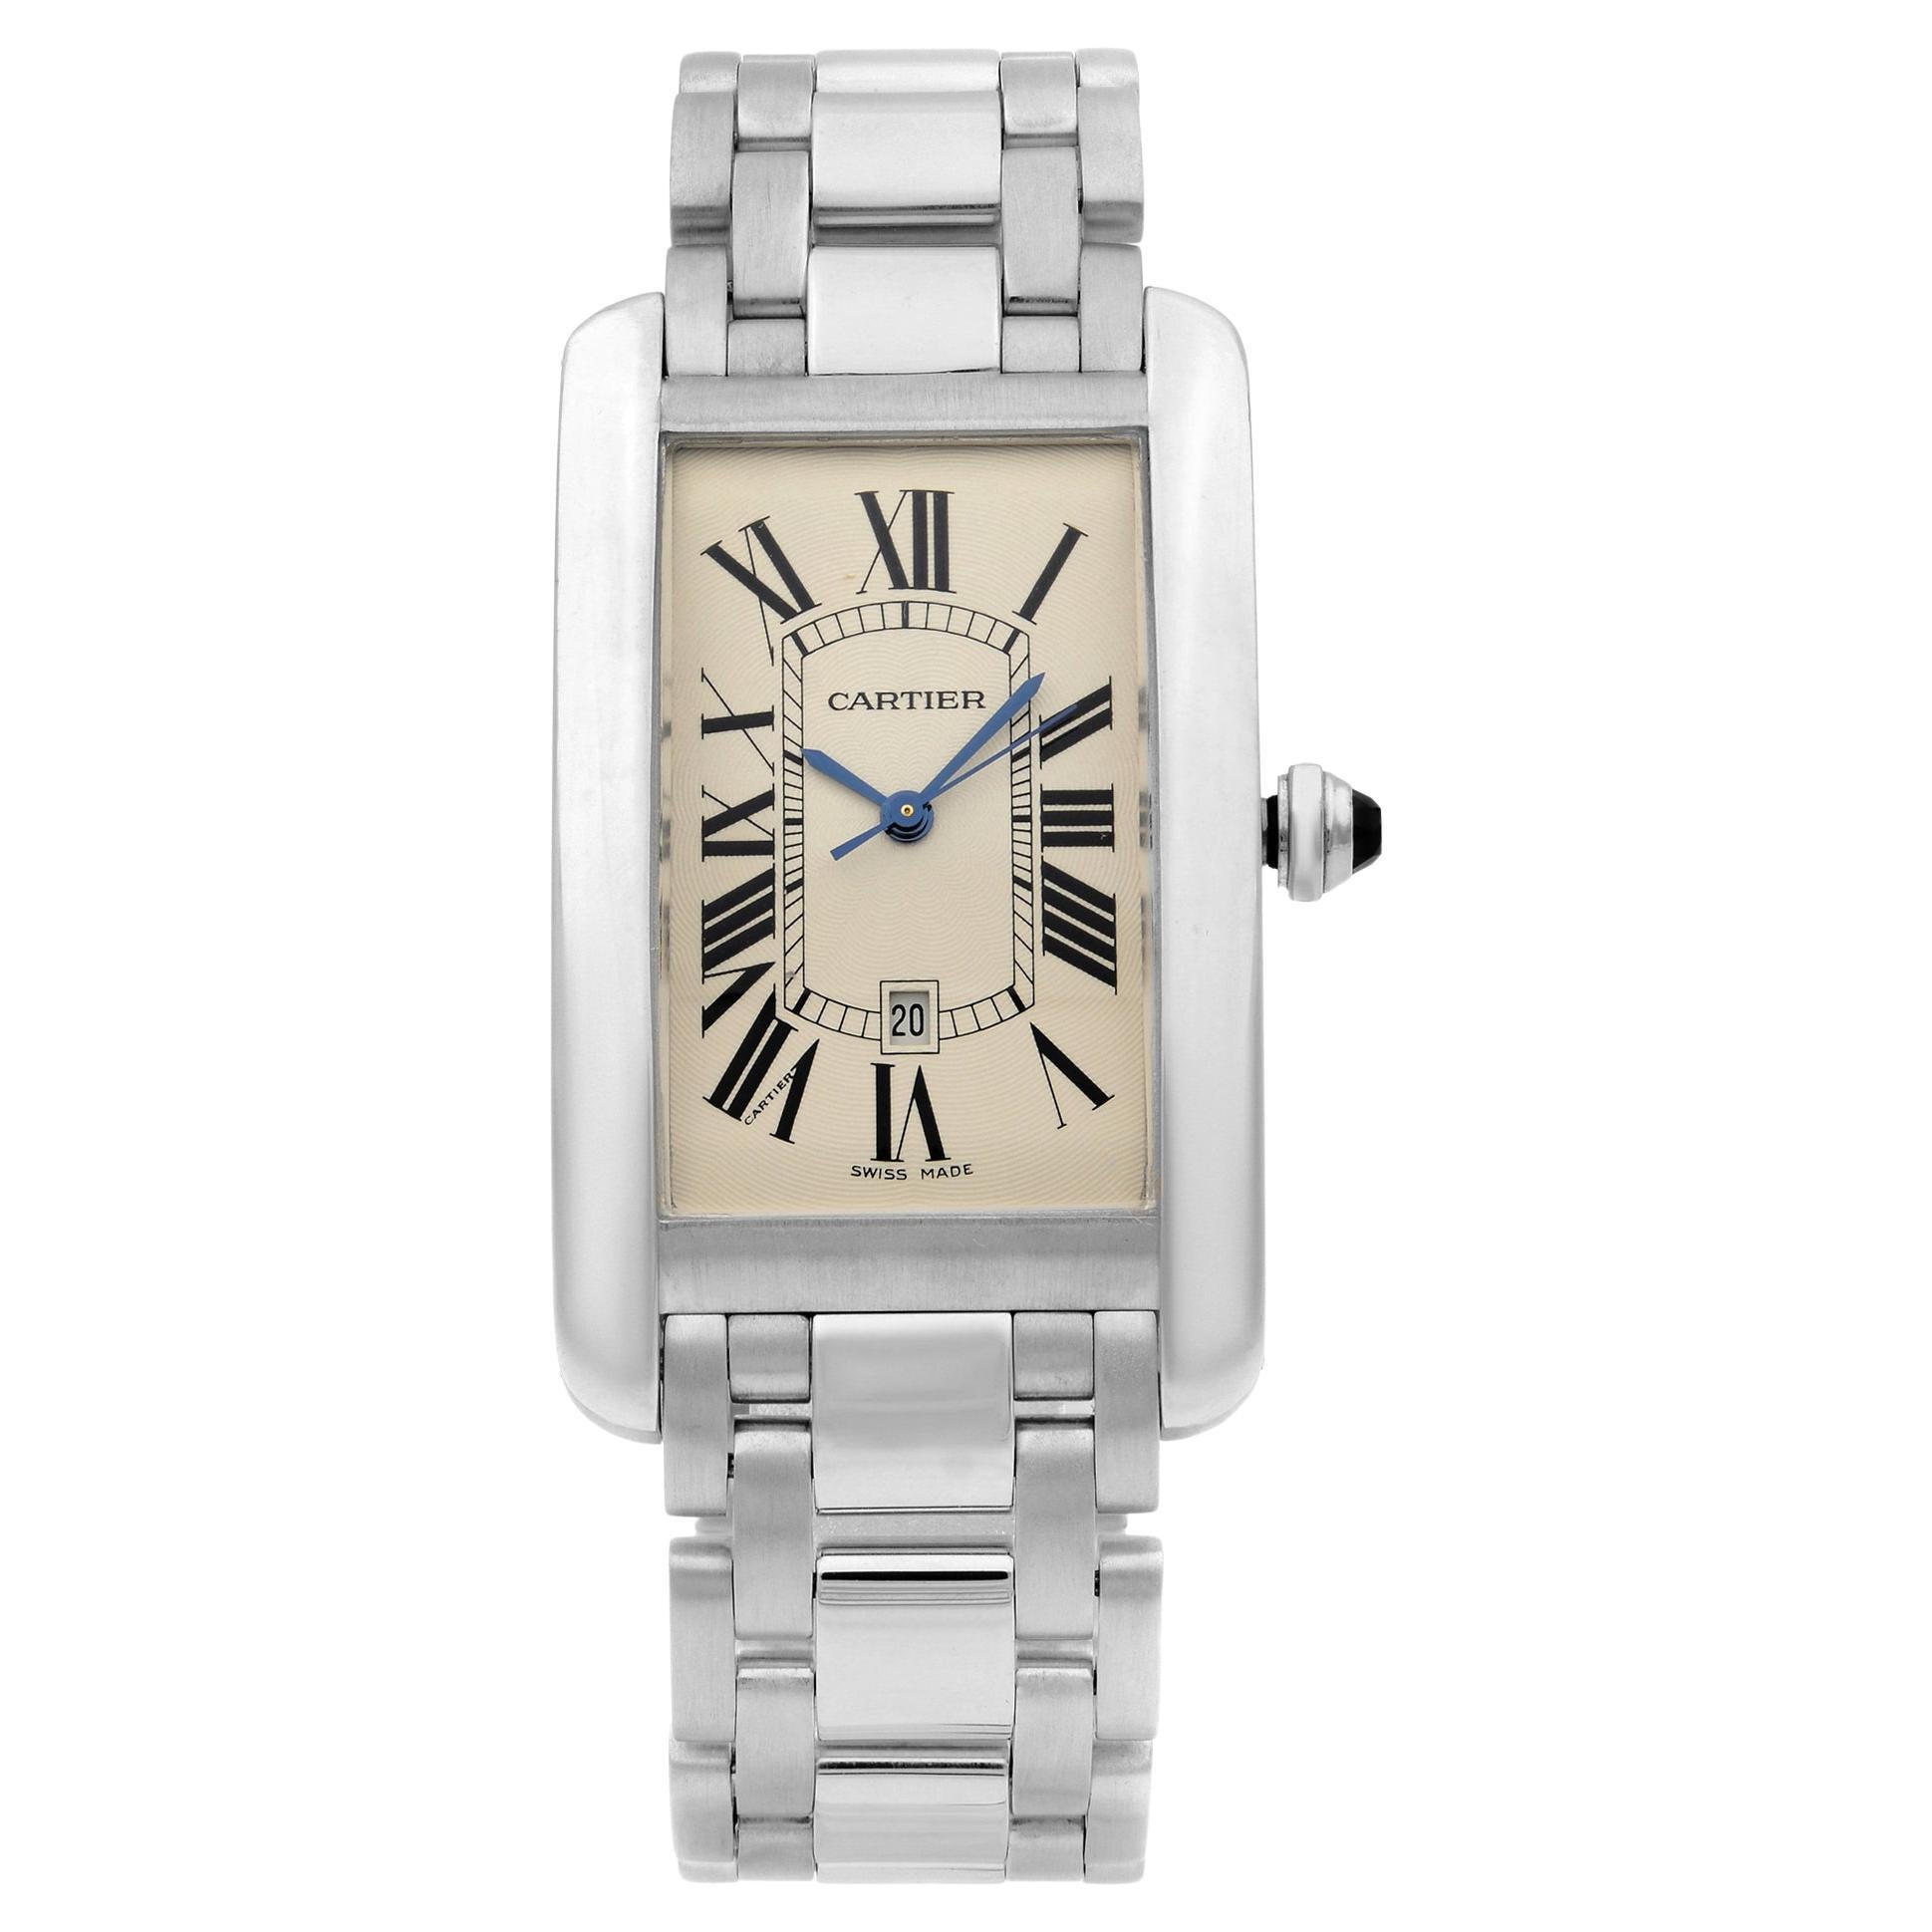 Cartier Tank Americaine 18K White Gold Cream Dial Automatic Mens Watch W2605511